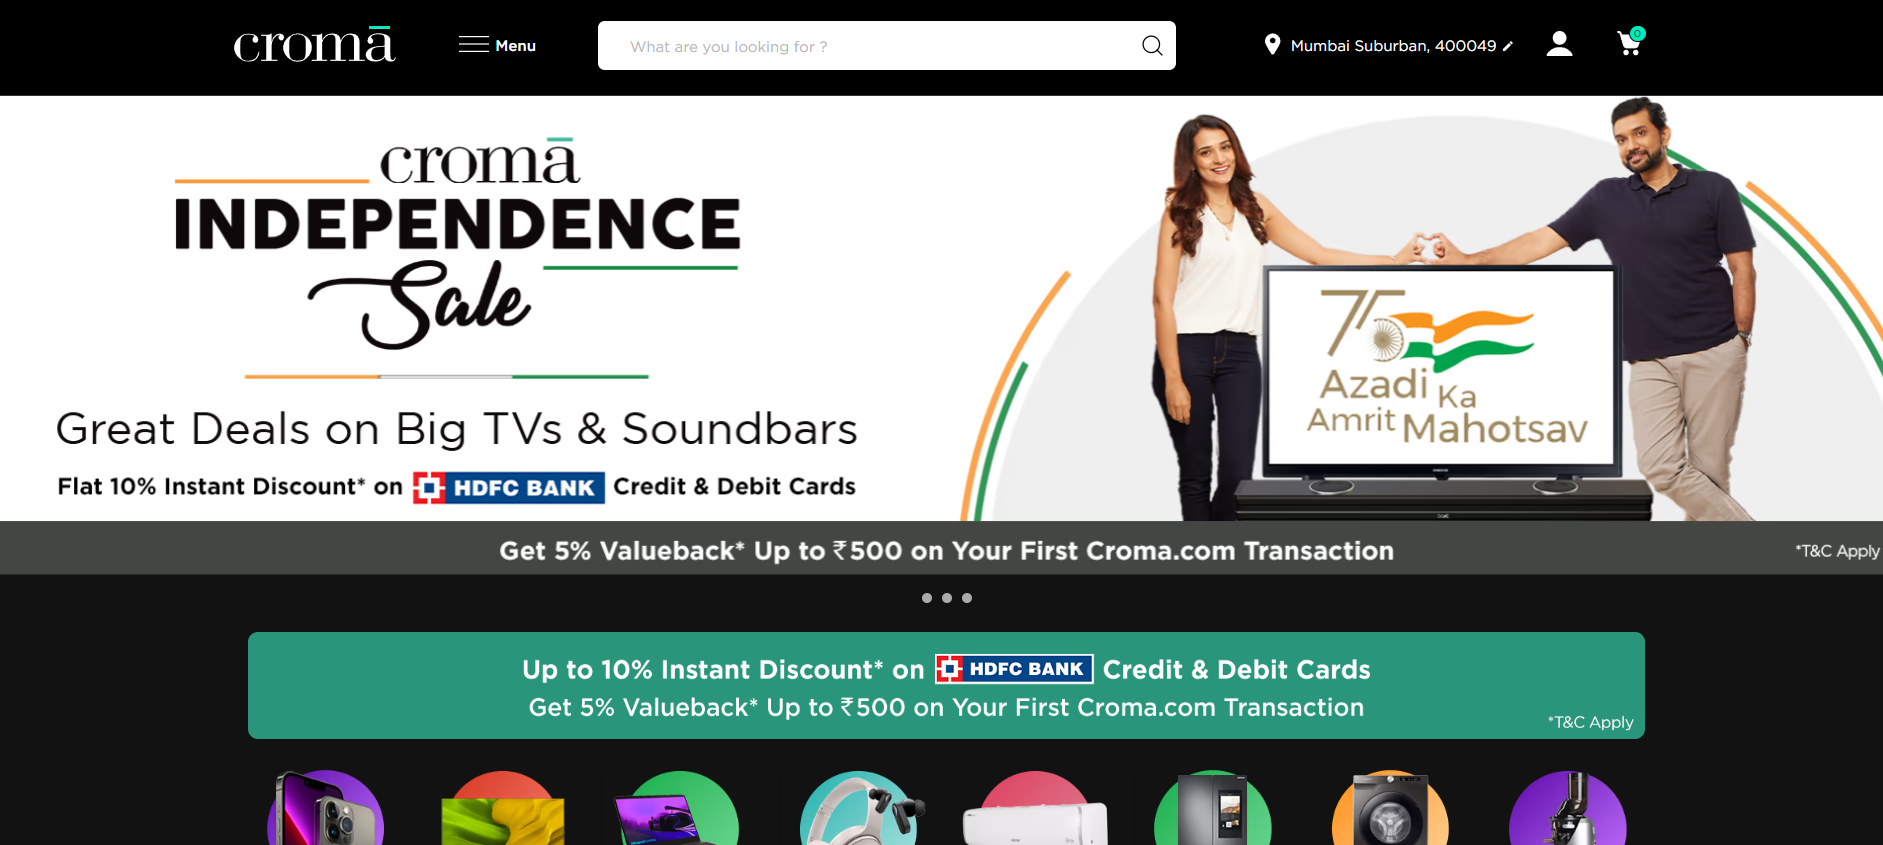 Croma Celebrates 75th Independence: Great Deals on TVs, Laptops, Smartphones and Accessories